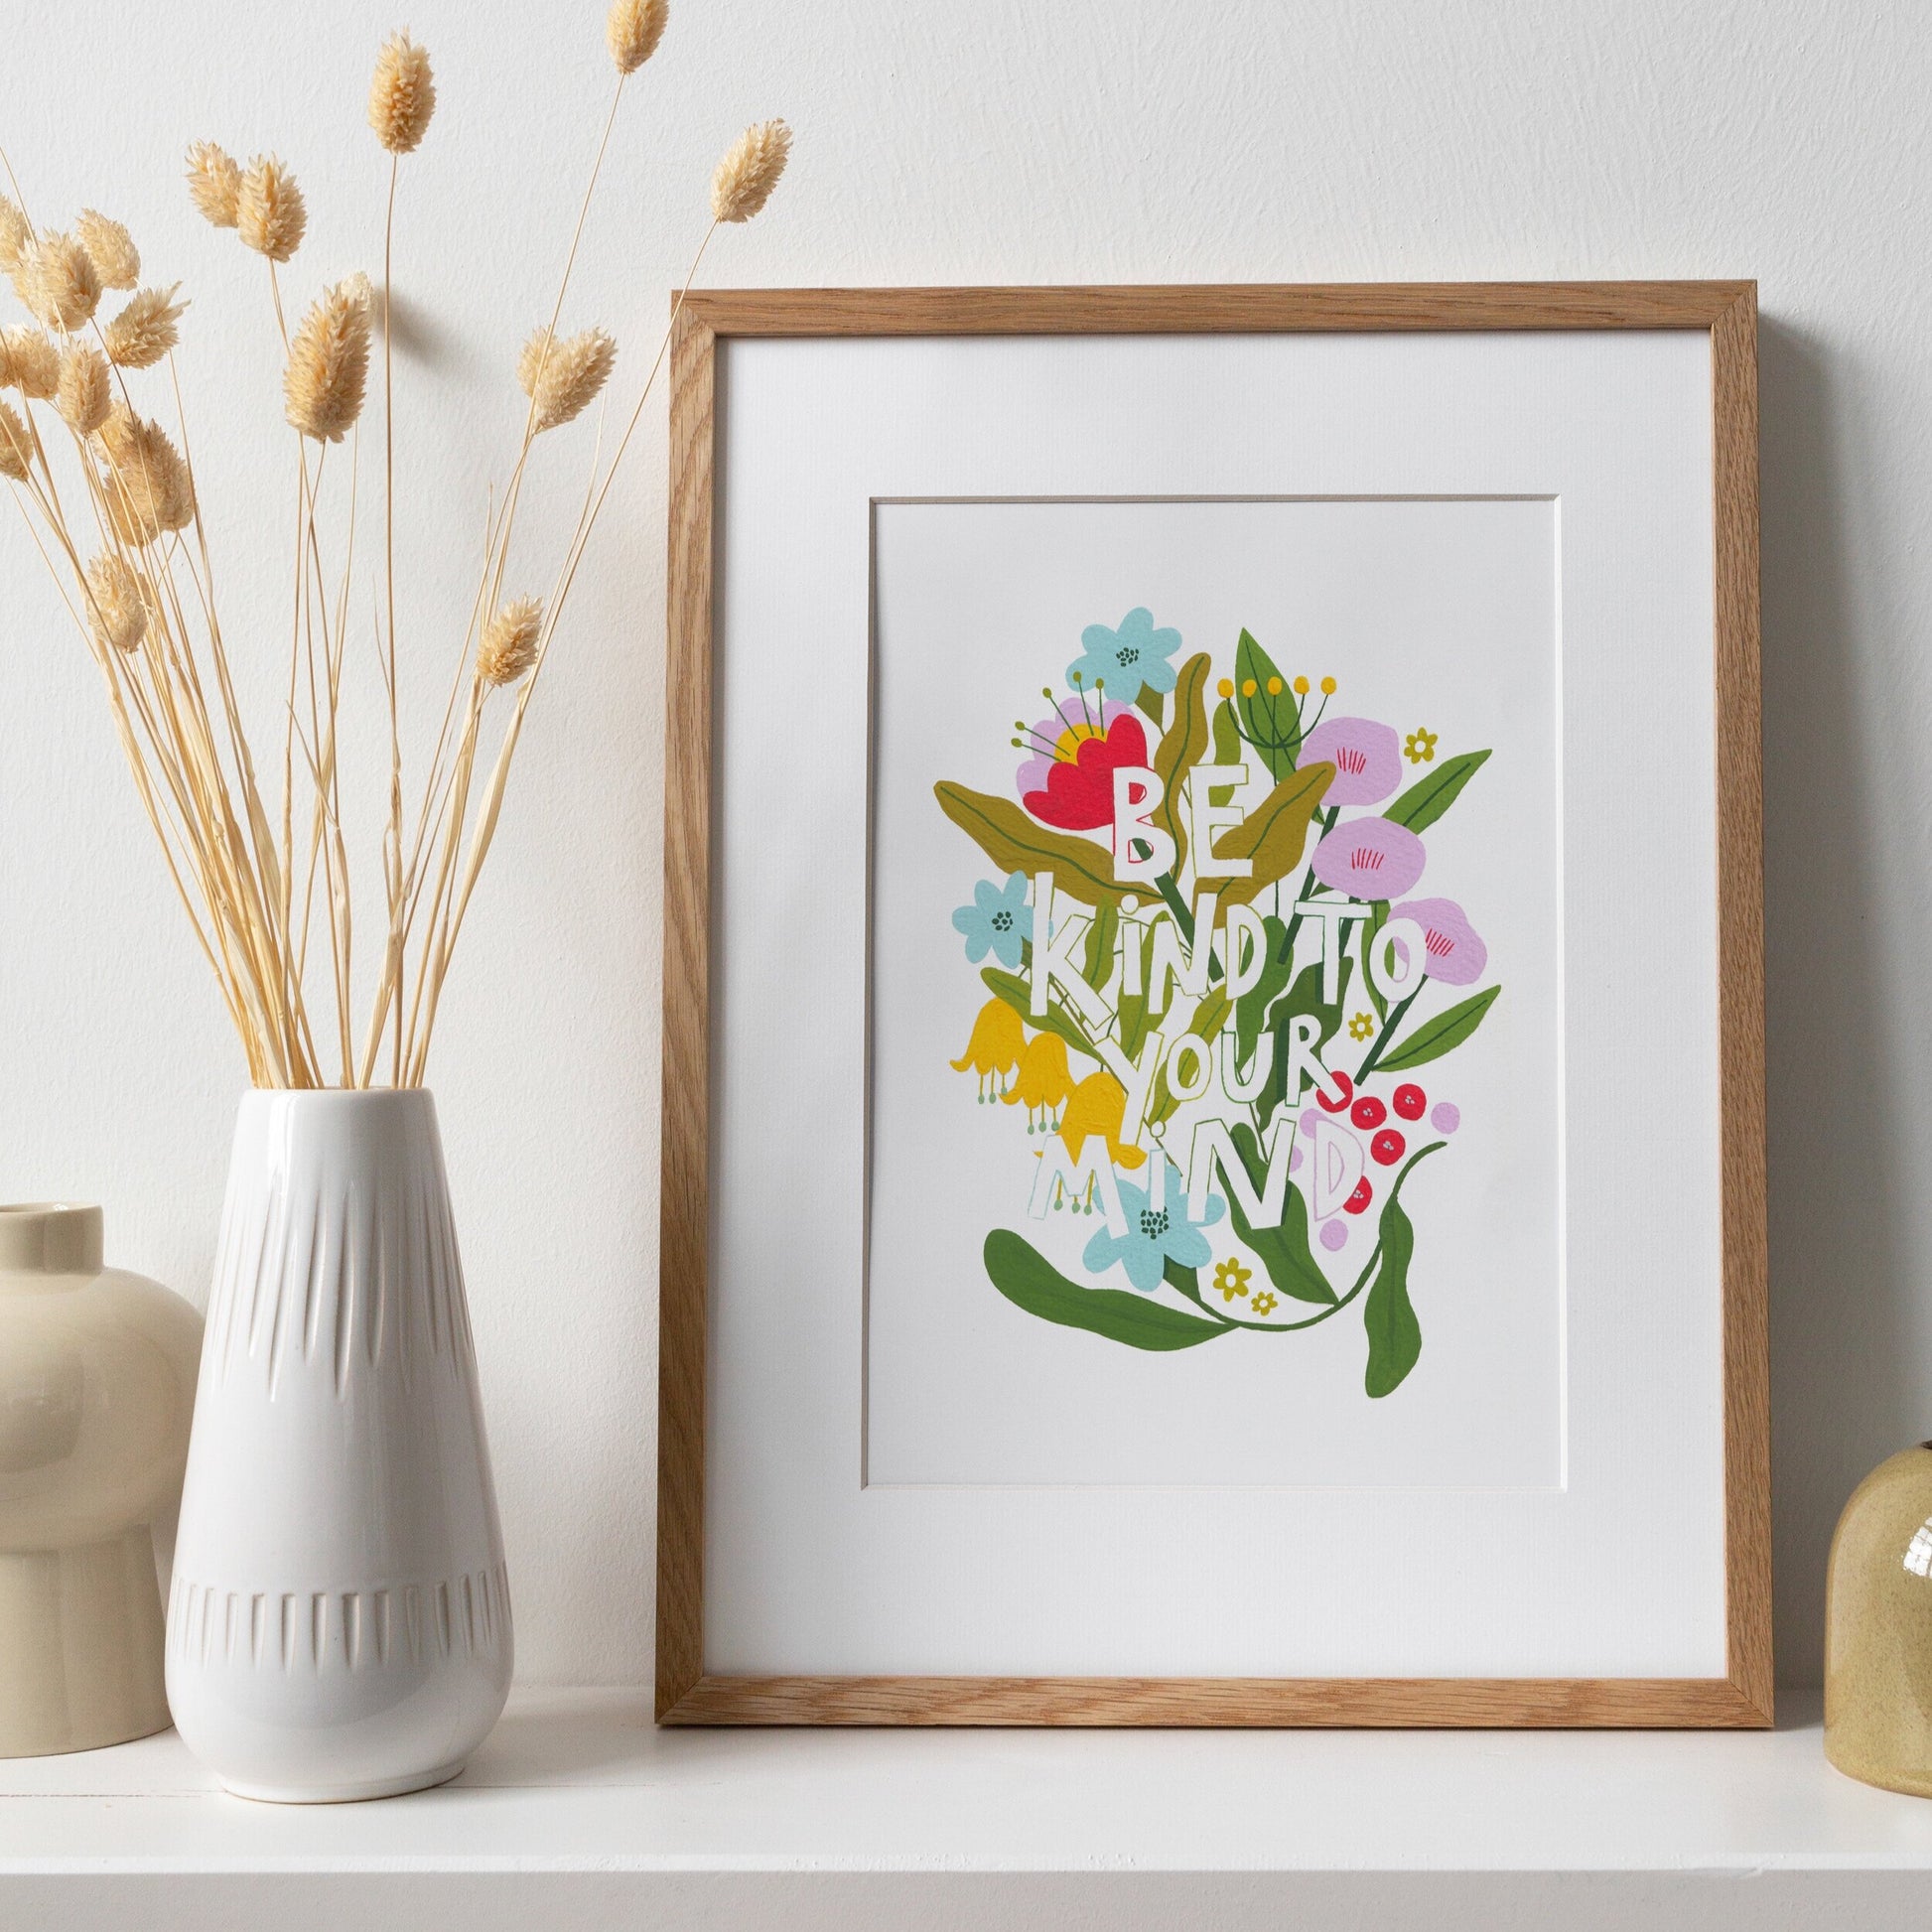 typography based print that says 'be kind to your mind' surrounded by flowers. background is white and the florals are lilac, yellow, blue and red!